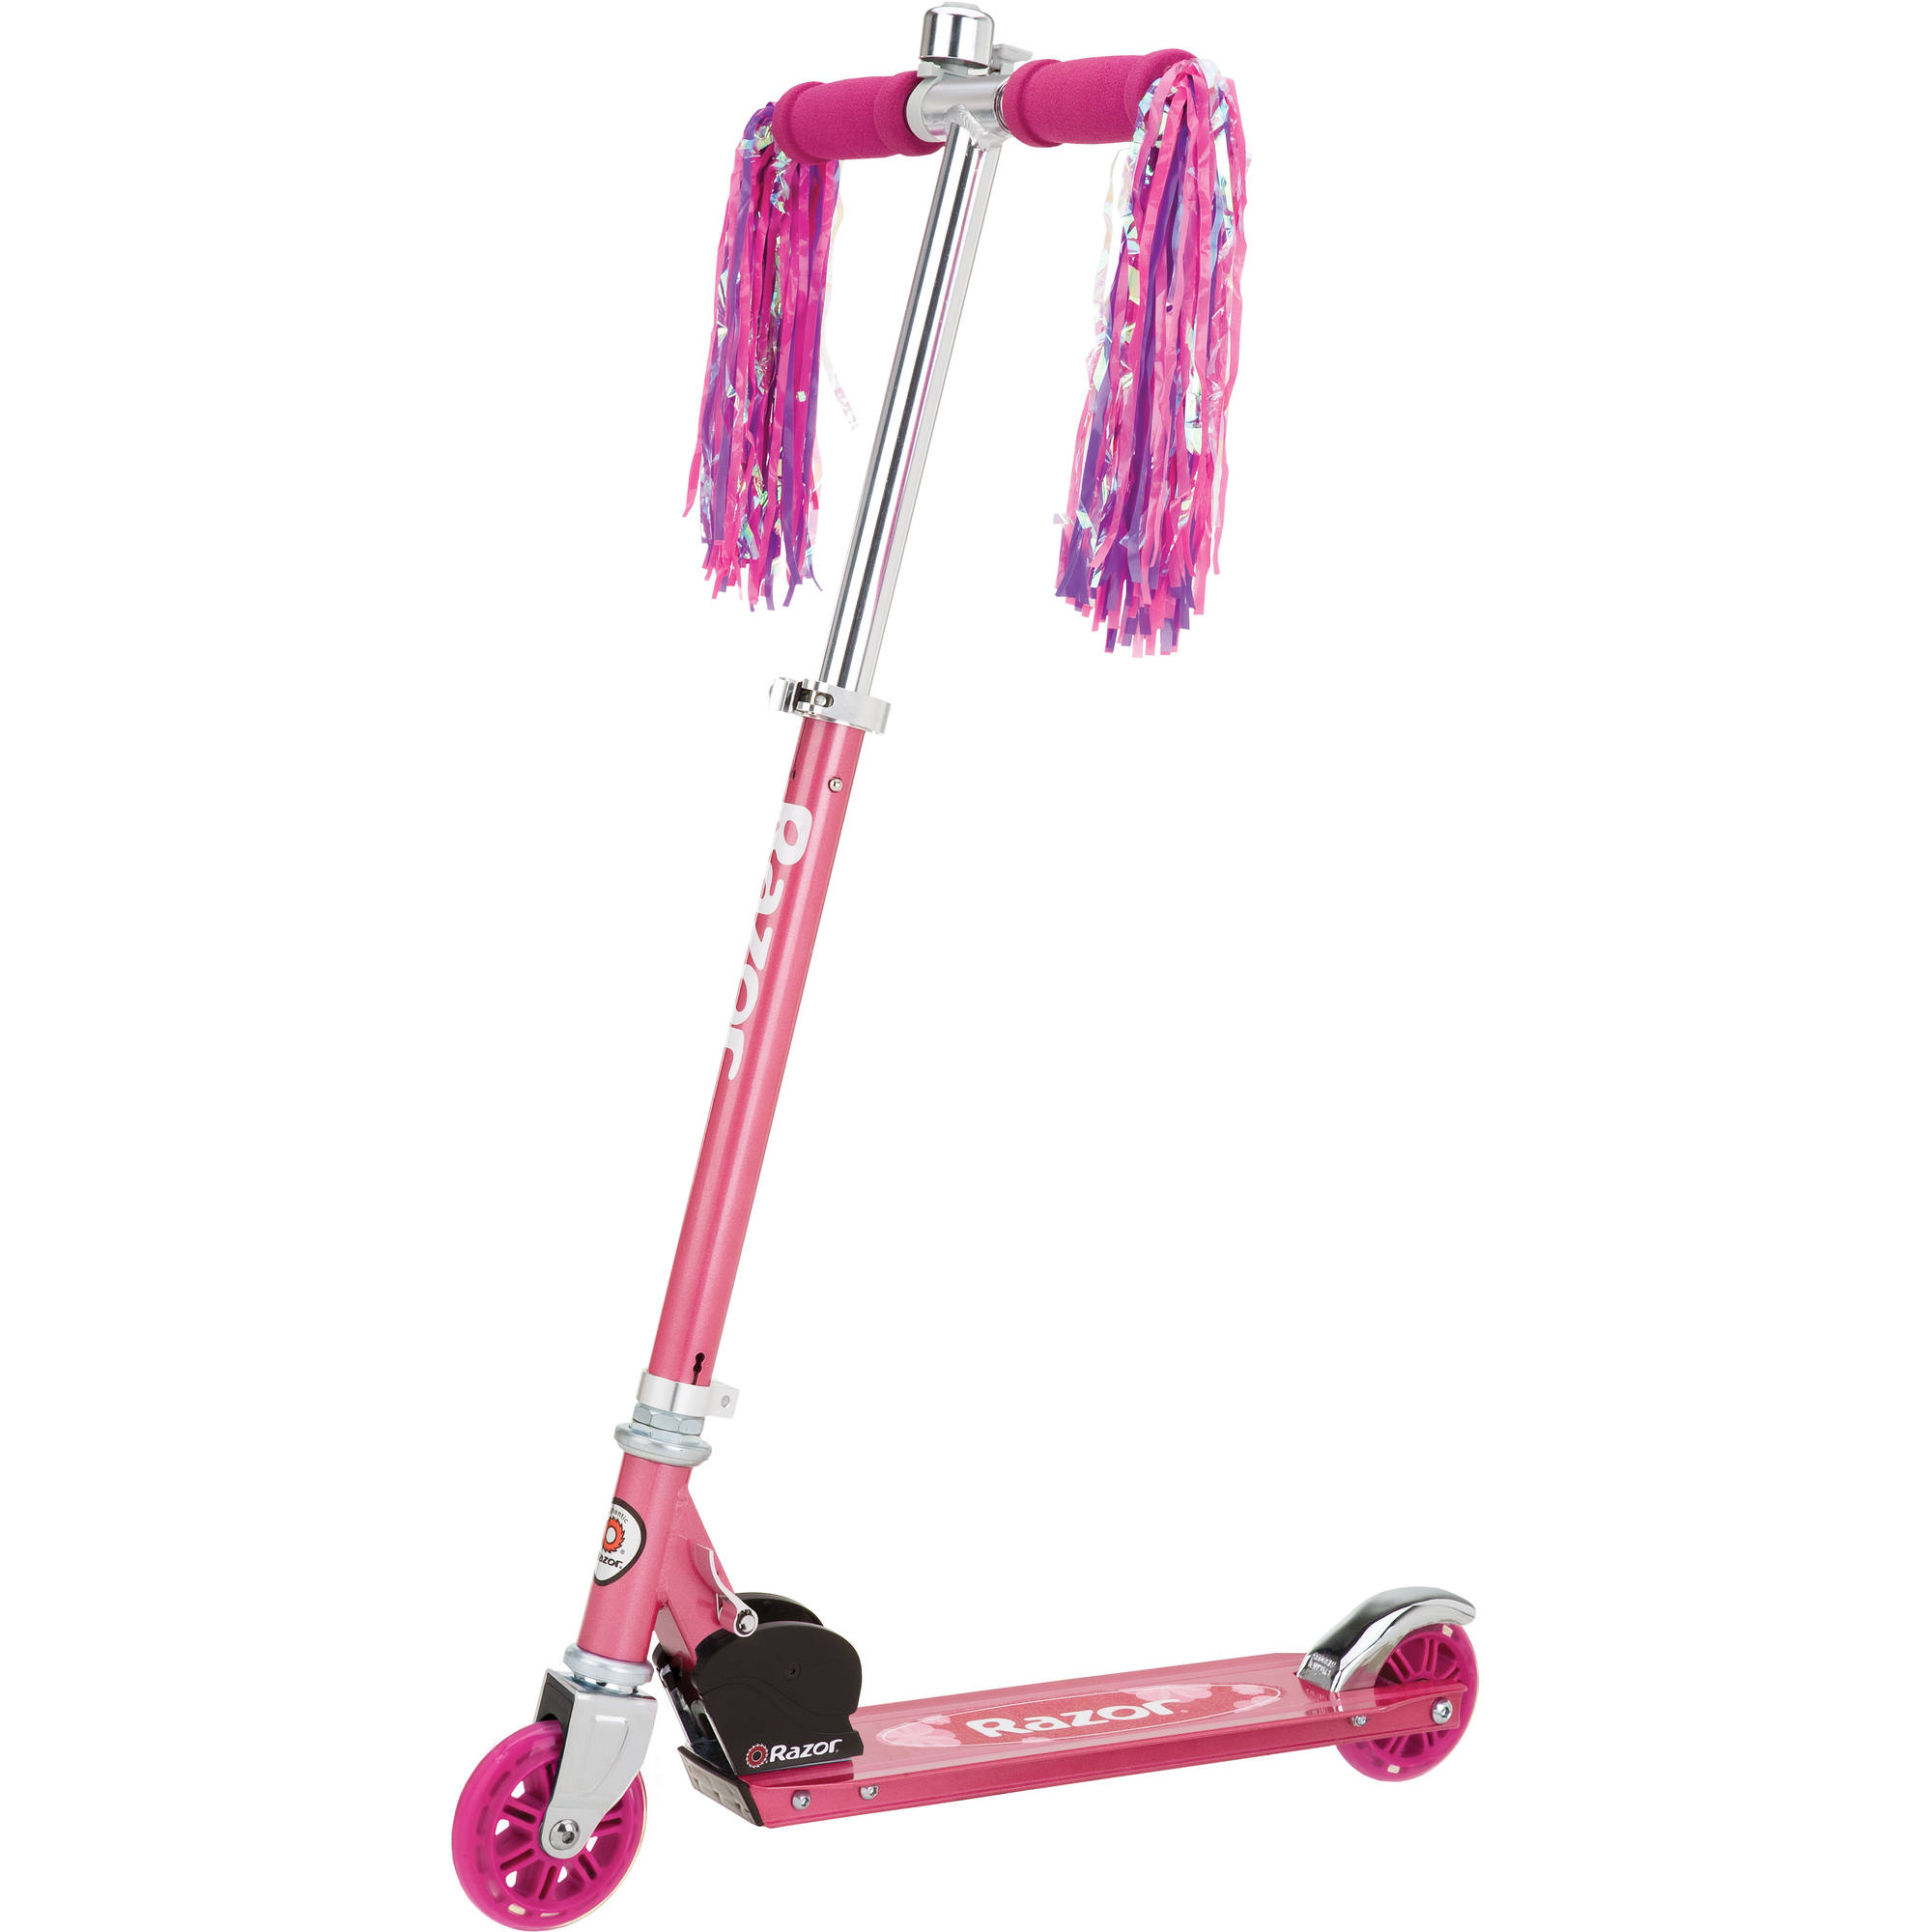 Razor A Kick Scooter for Kids - Sweet Pea, Lightweight, Foldable, Aluminum Frame, for Child Ages 5+ - image 1 of 9